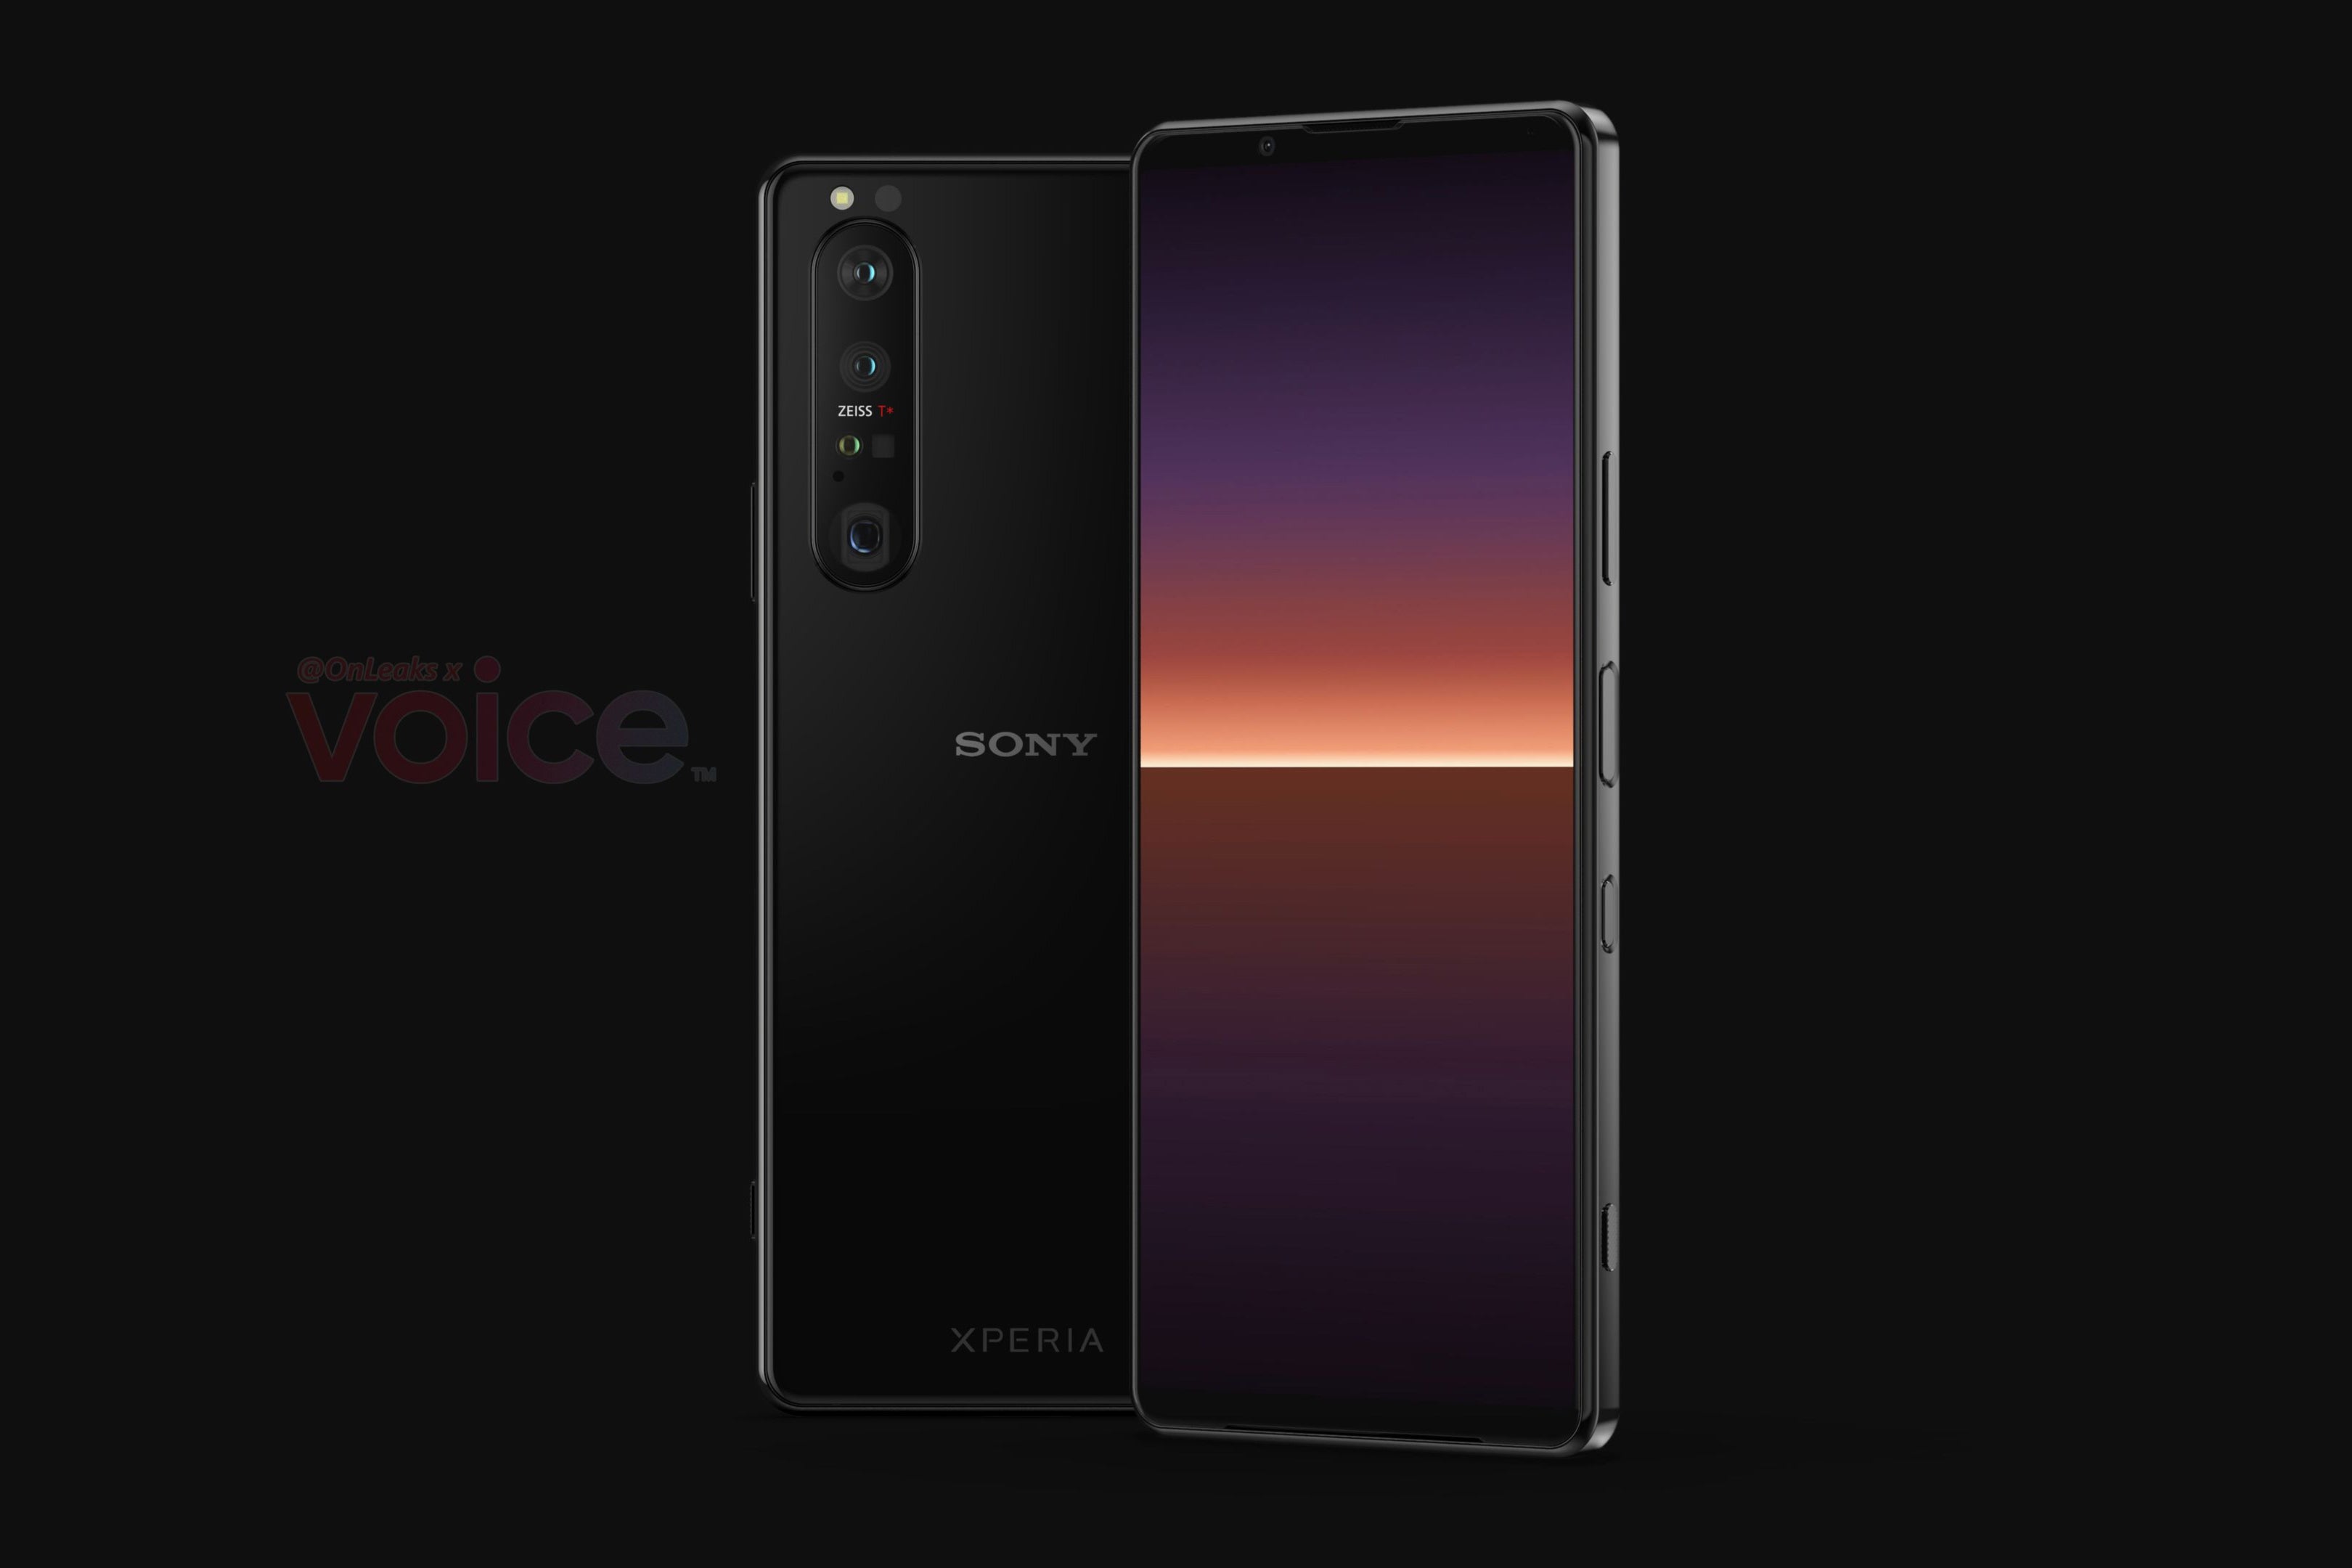 Sony Xperia 1 III CAD-based renders - Sony teases Xperia 1 III name in trailer video ahead of April 14 event